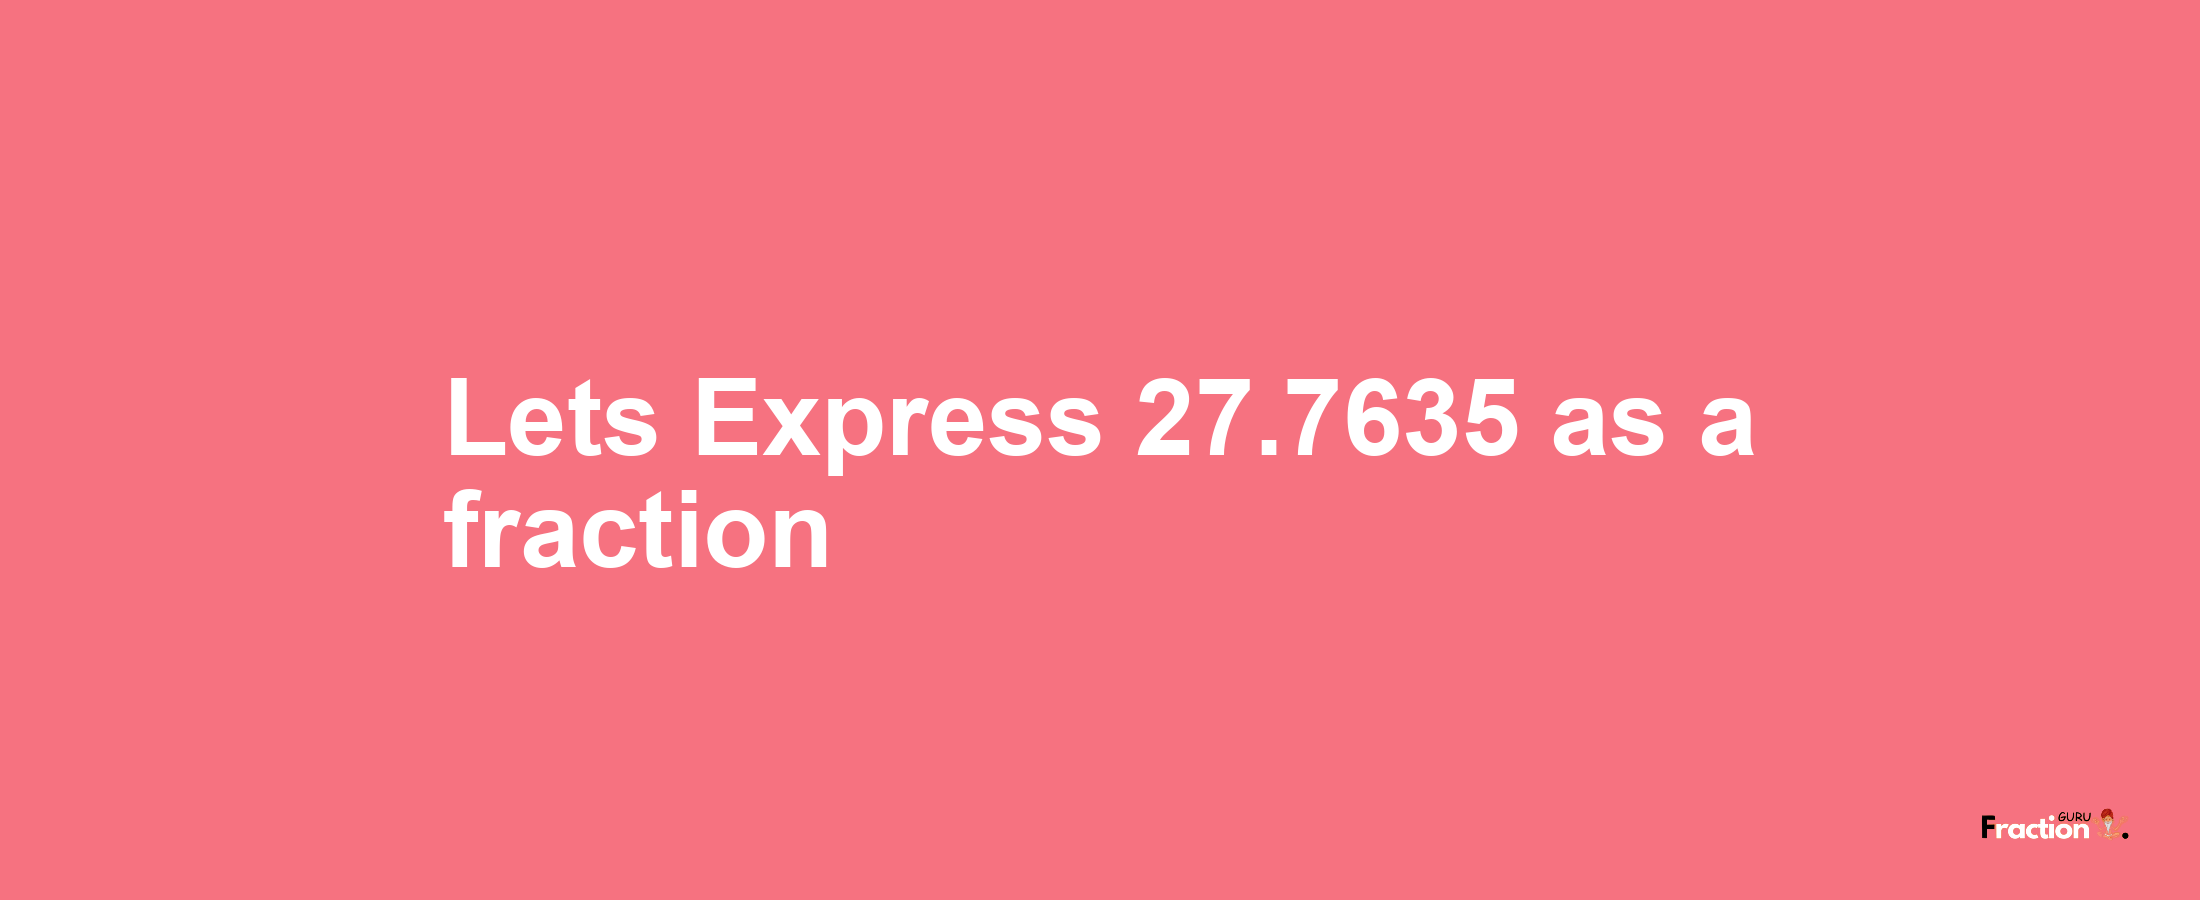 Lets Express 27.7635 as afraction